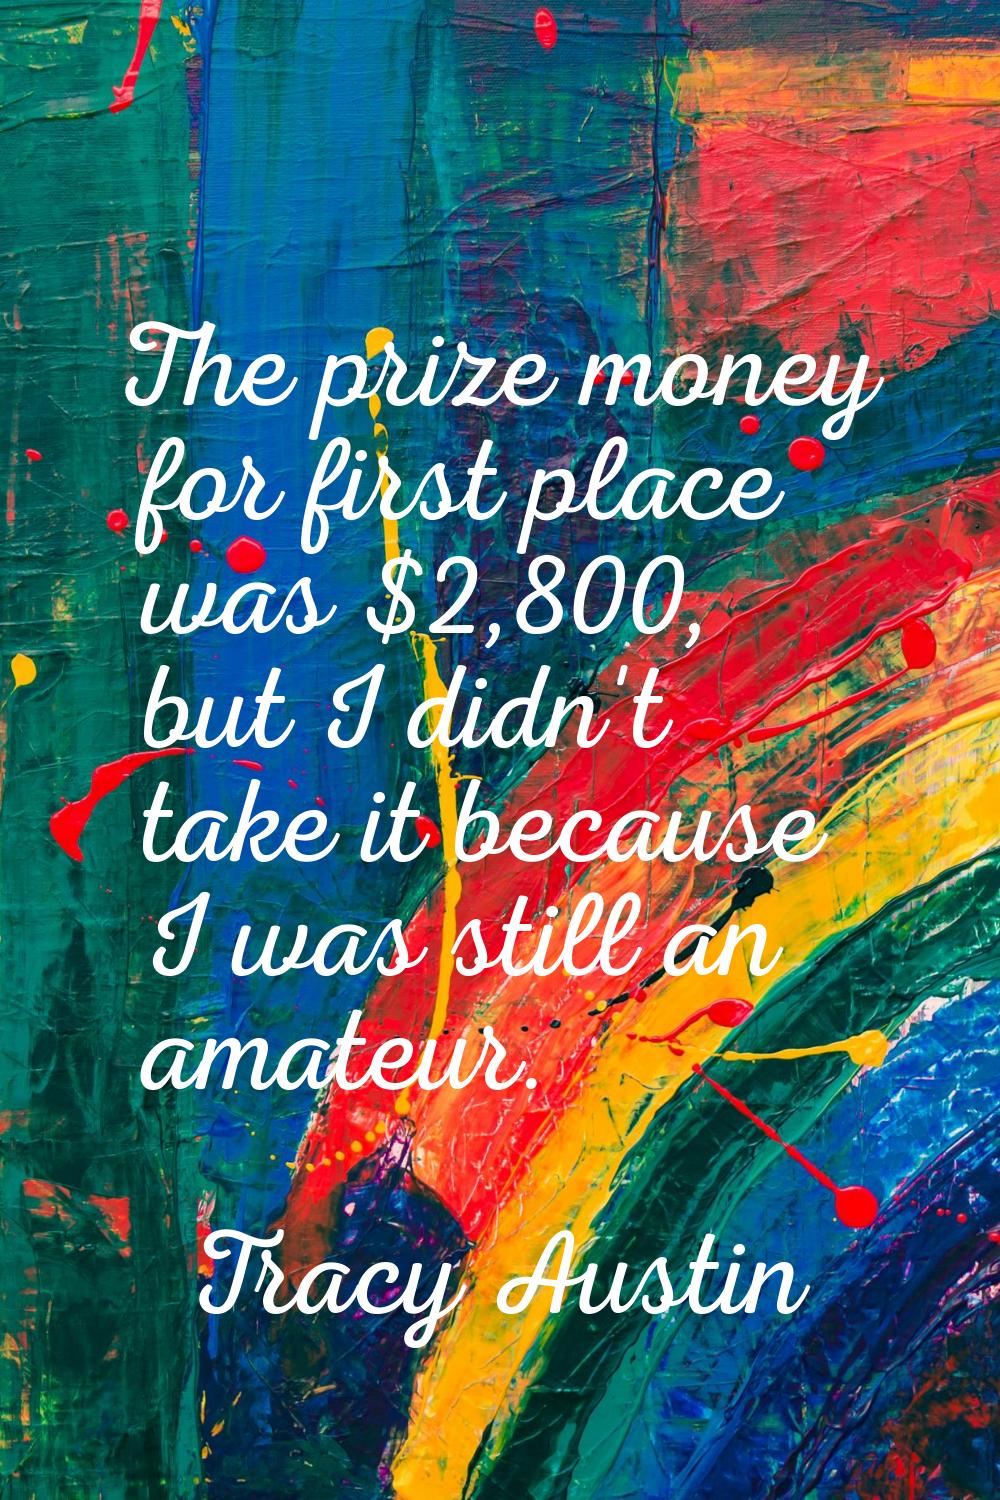 The prize money for first place was $2,800, but I didn't take it because I was still an amateur.